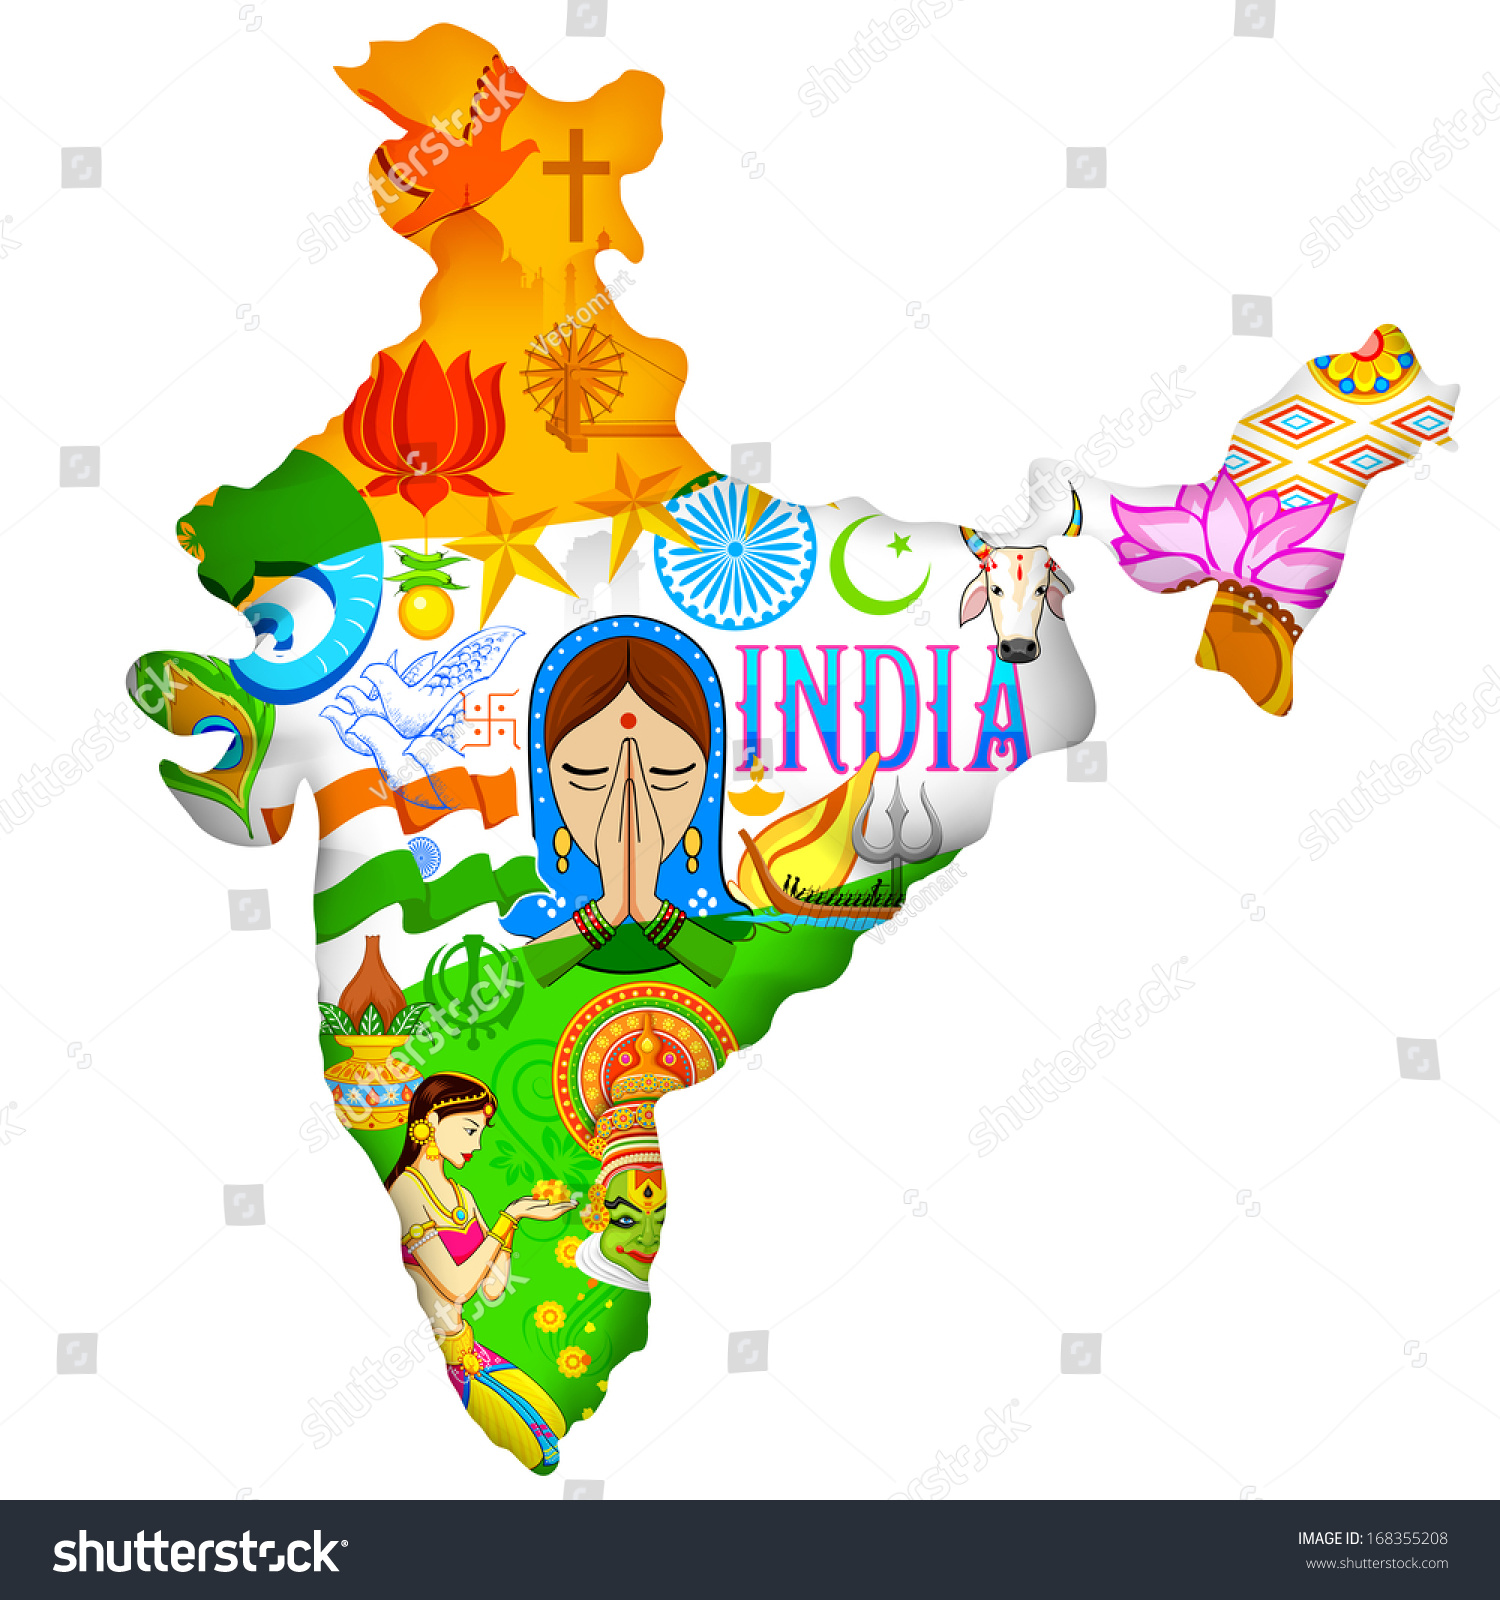 Illustration Indian Map Showing Culture India Immagine Vettoriale Stock Royalty Free